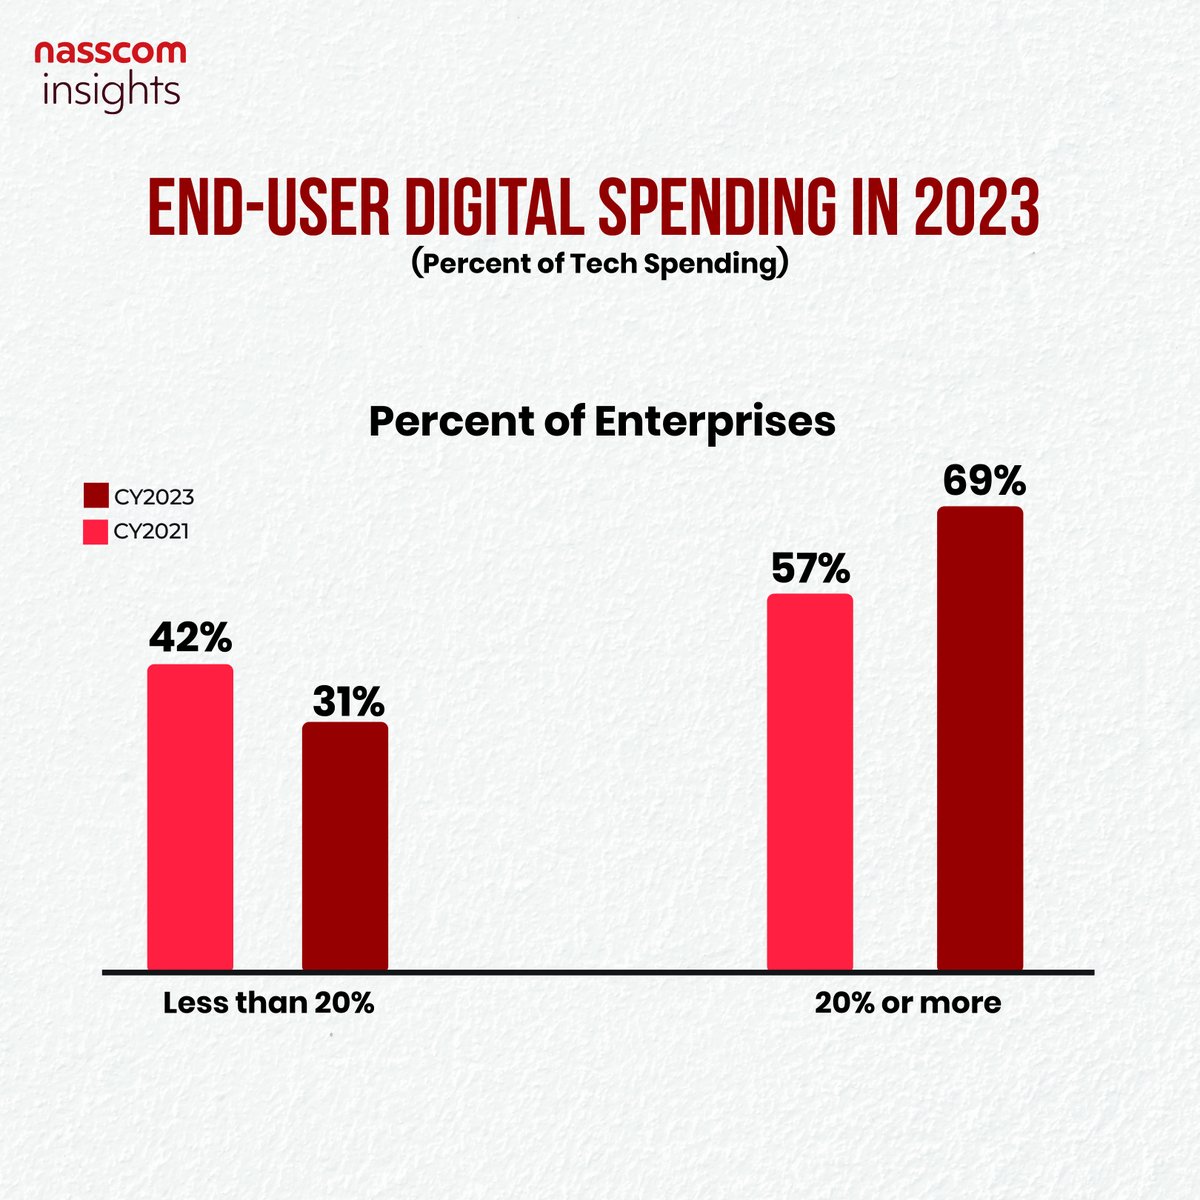 ~70% of the global enterprises spent 20% or more of their technology budget on digital in 2023.

More Details in the Report 👉community.nasscom.in/communities/di… 

#DigitalEnterprise #AI #DigitalIndia #DigitalTransformation #TechNews #TechTrends #TechBudgets #TechSpending #Digital #TECH4ALL